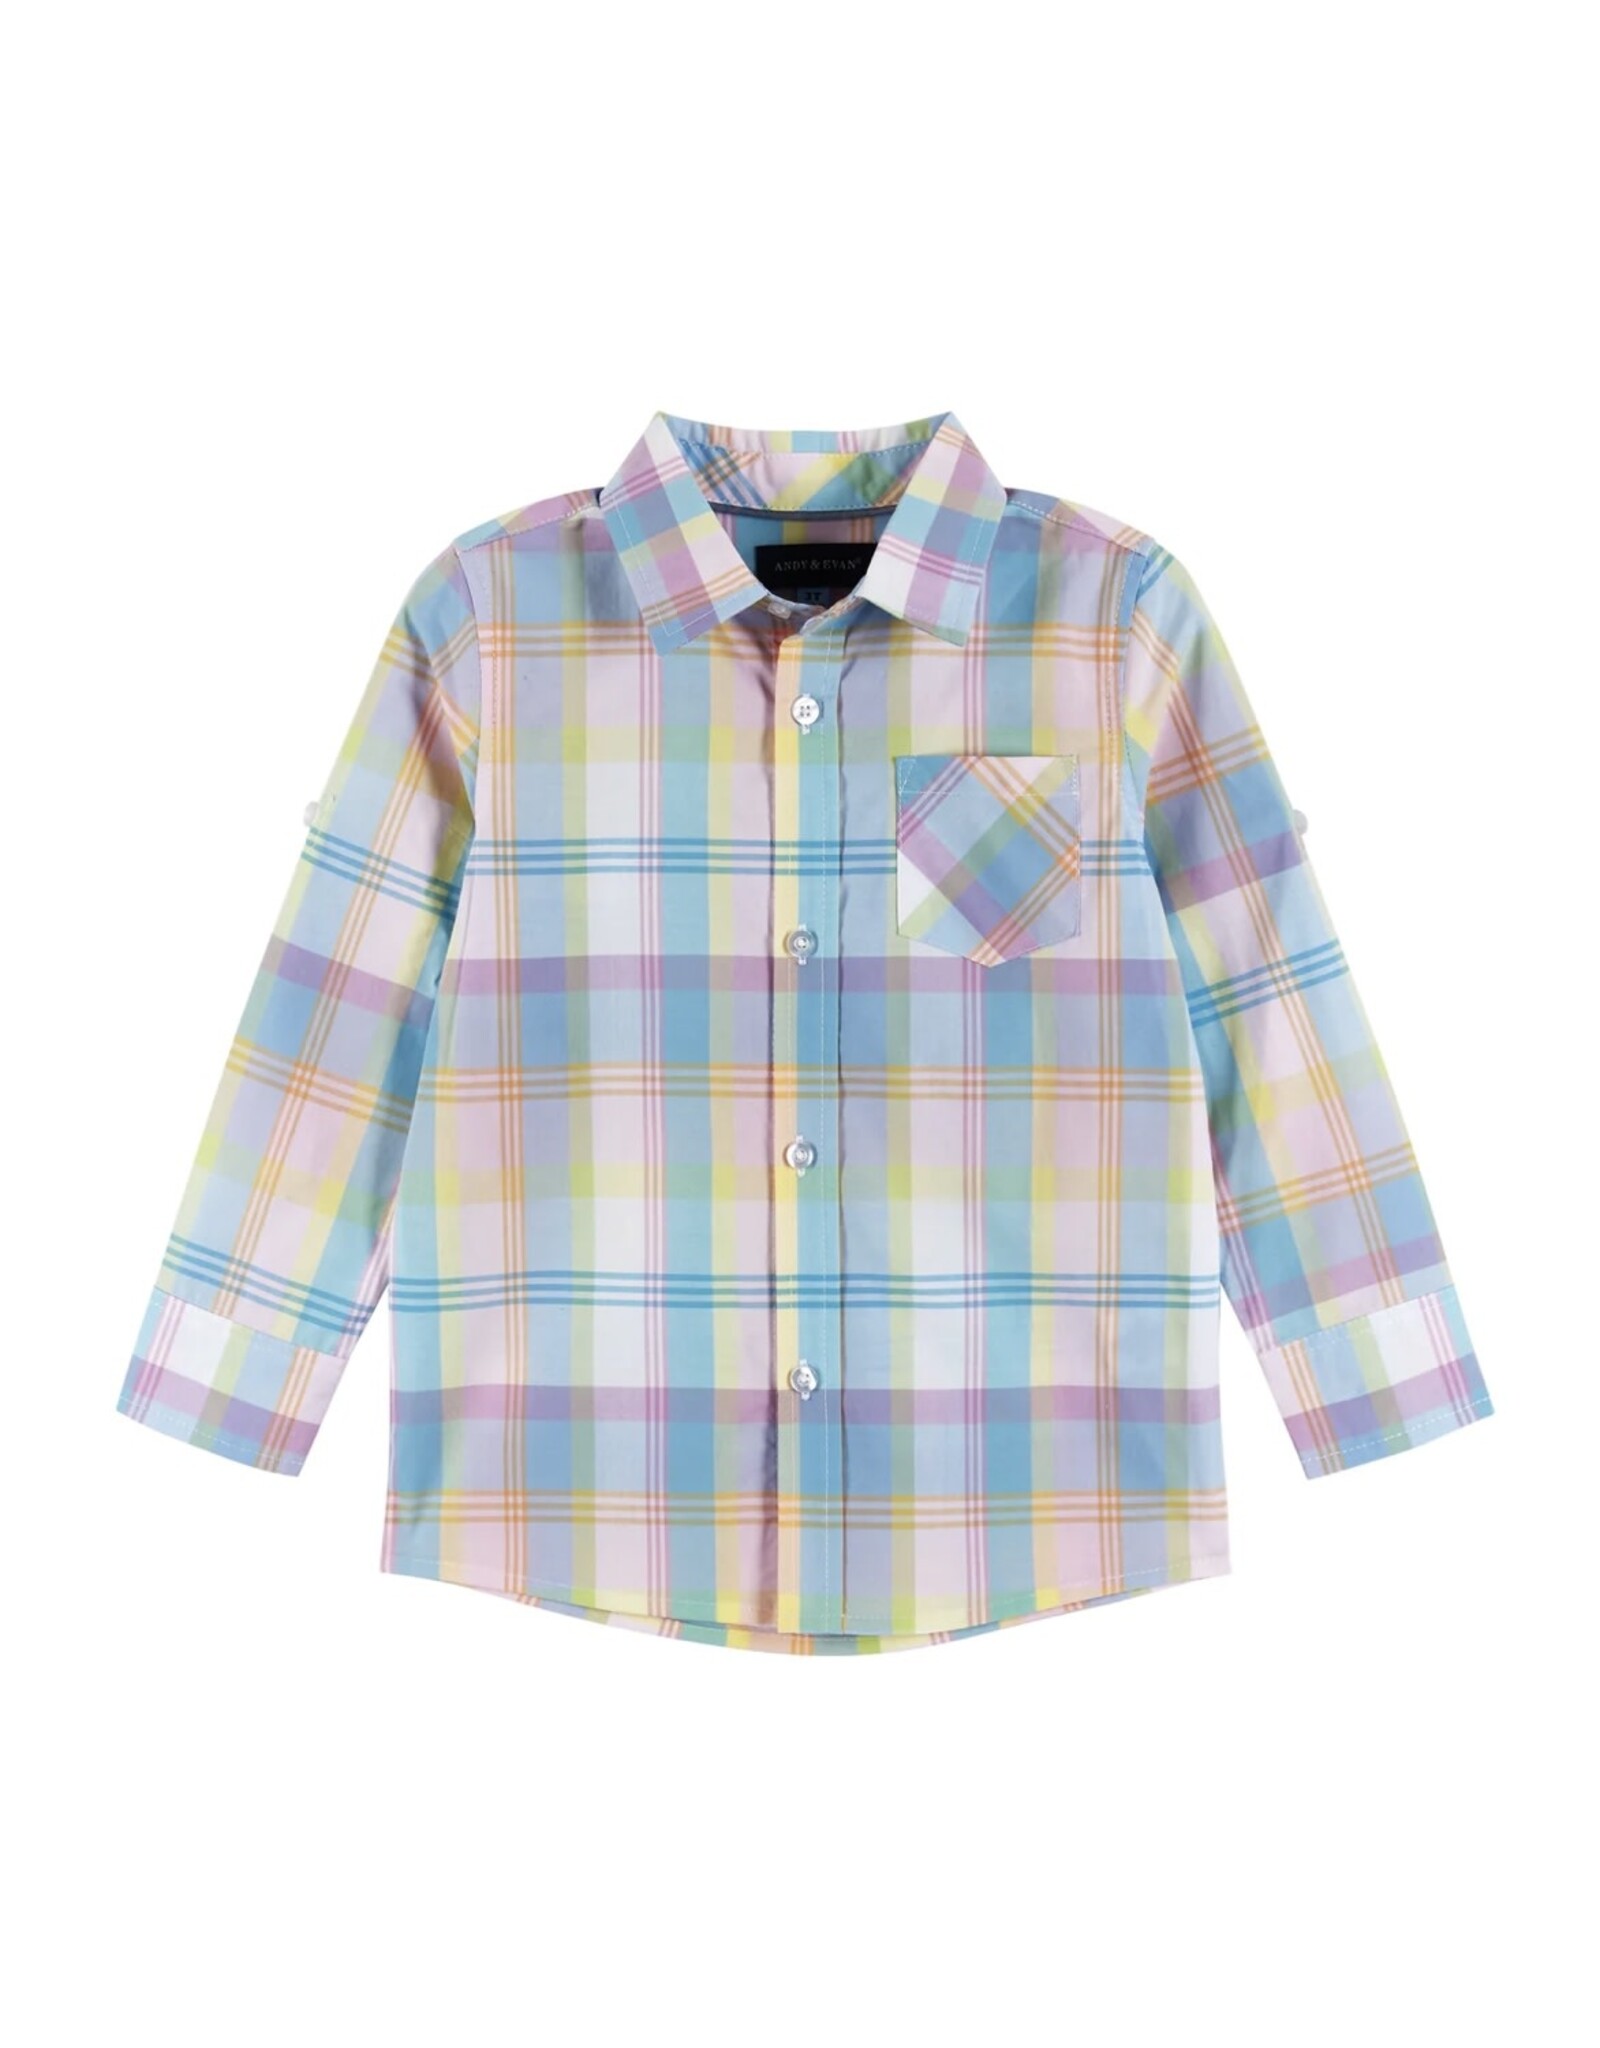 Andy & Evan Andy & Evan- White Plaid Pastel Button Down